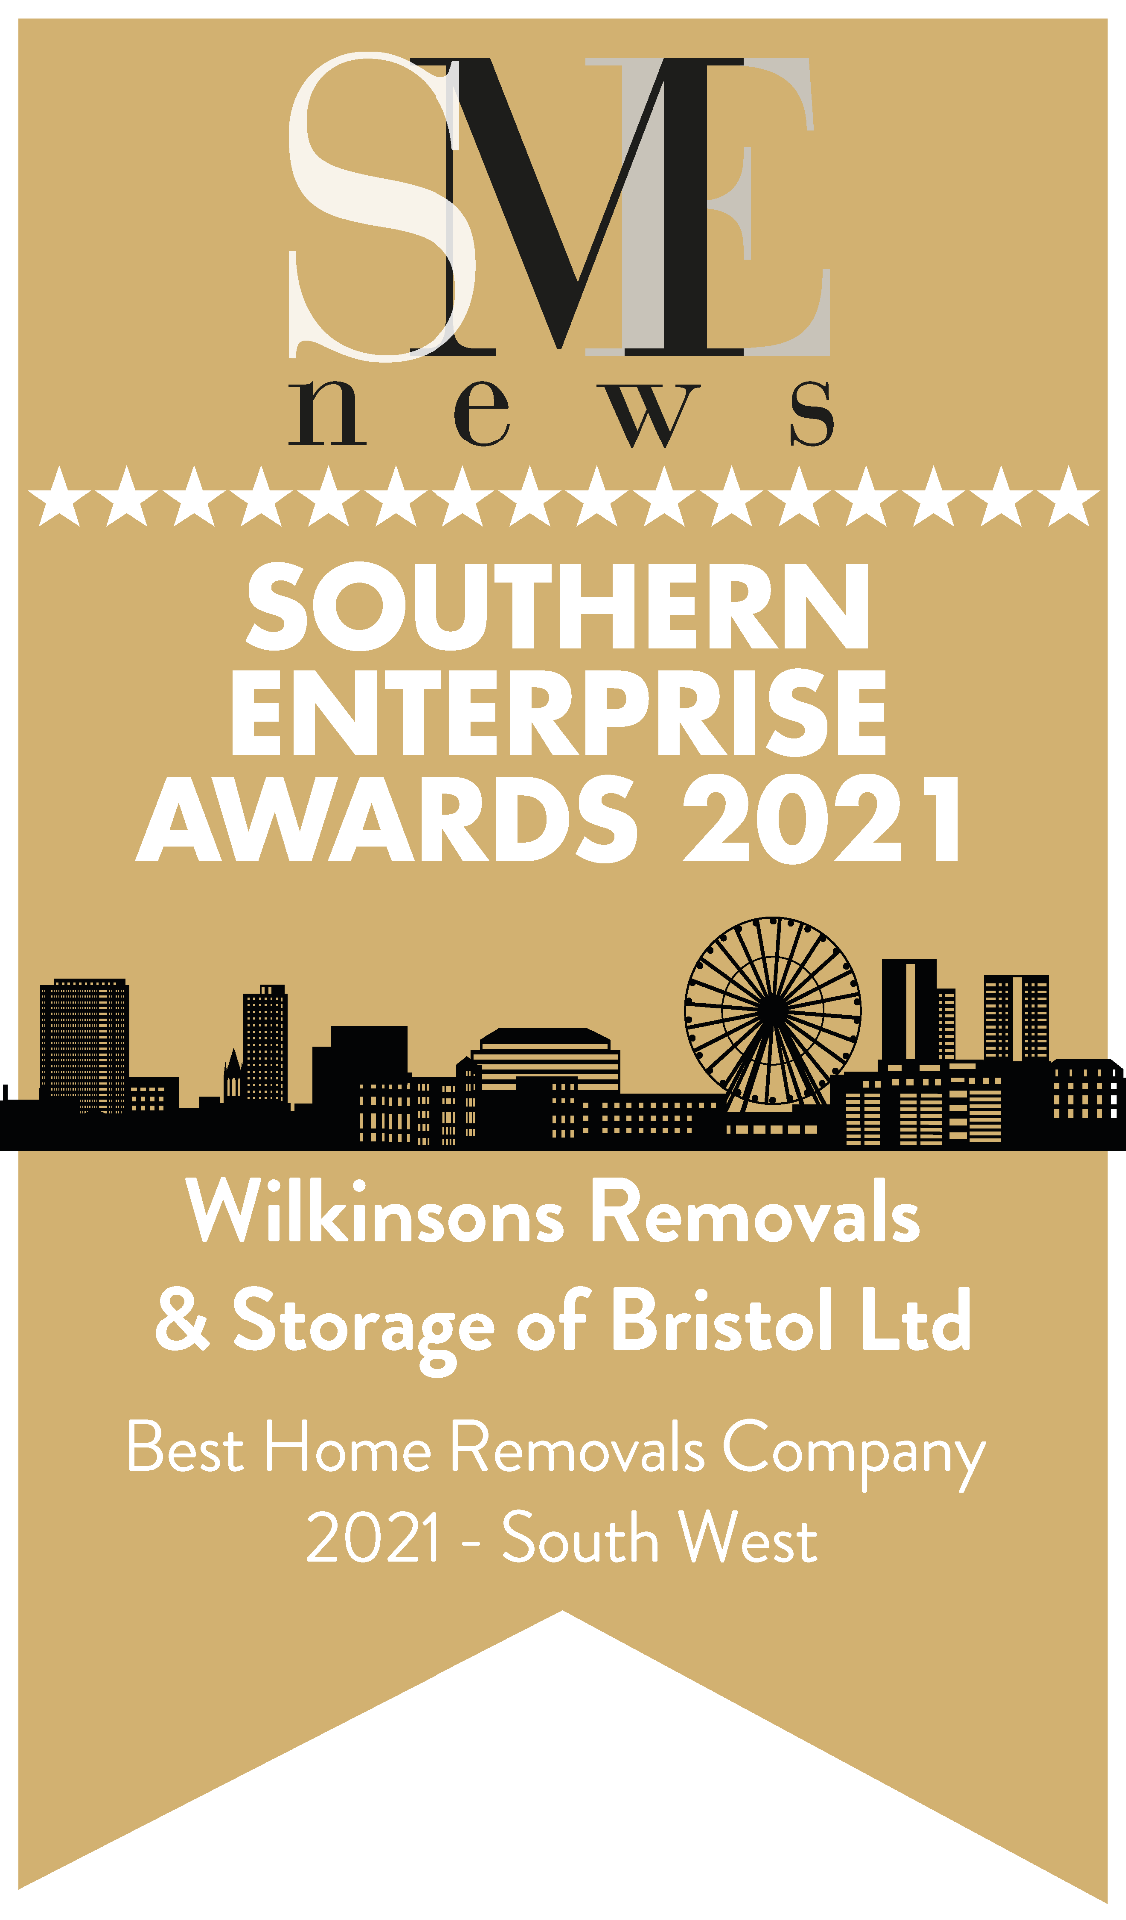 SME News awarded Wilkinsons as Best Home Removals Company 2021 in the South West